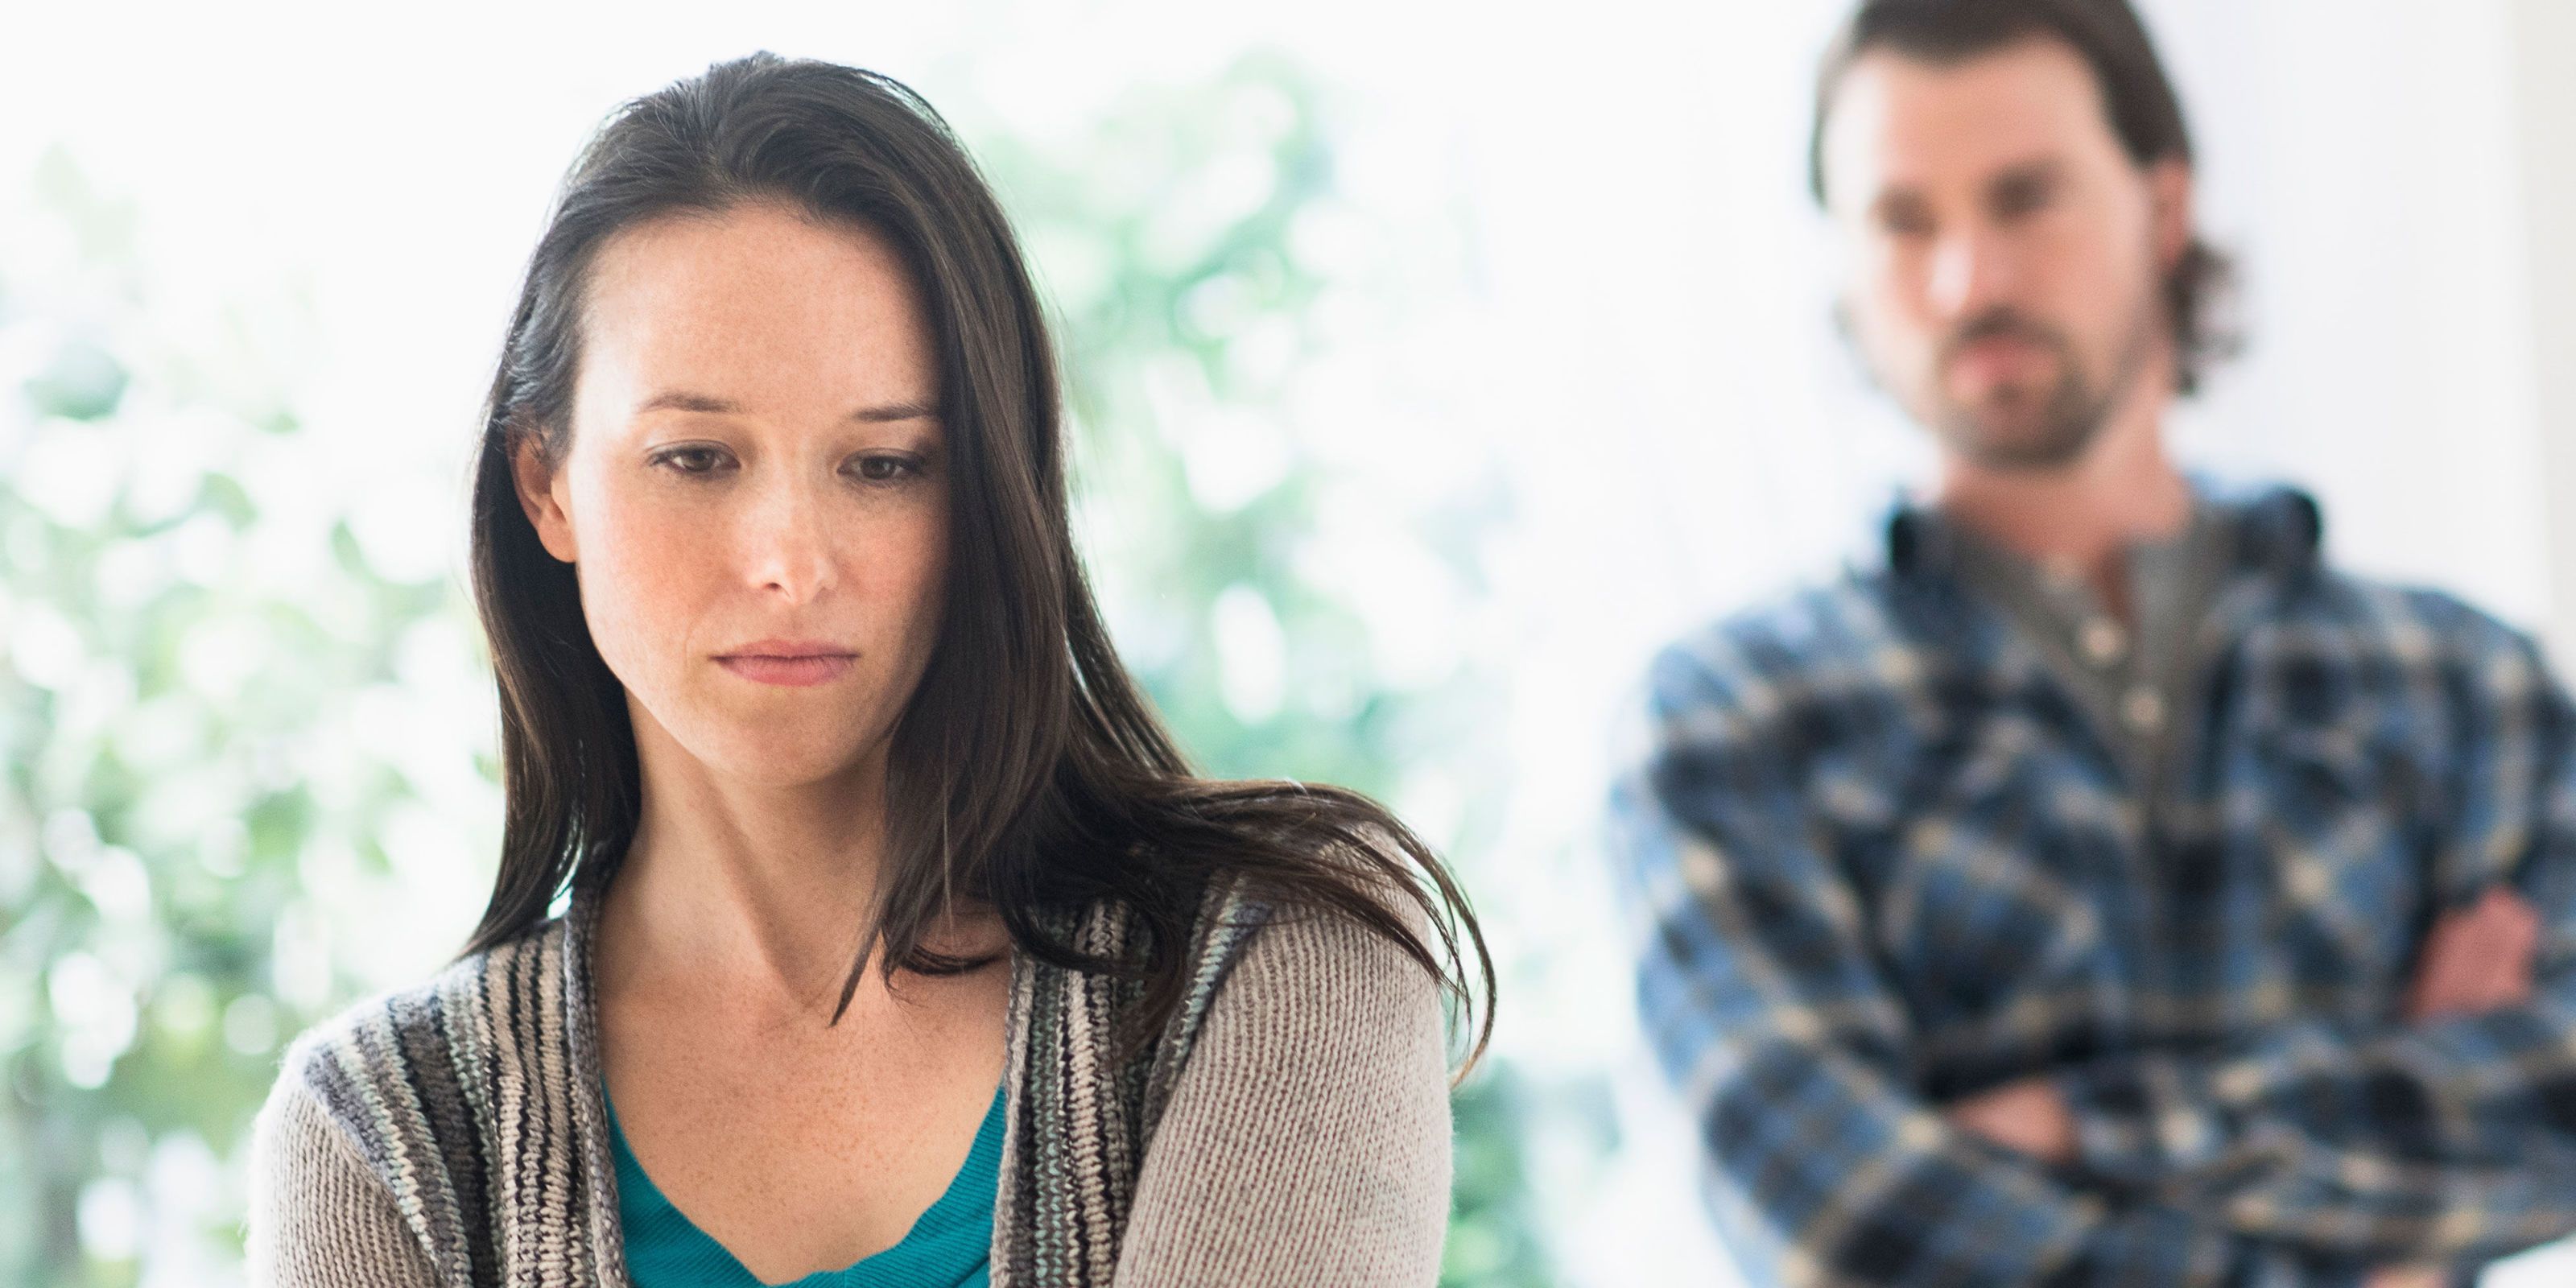 Signs Your Spouse May Be Emotionally Abusive